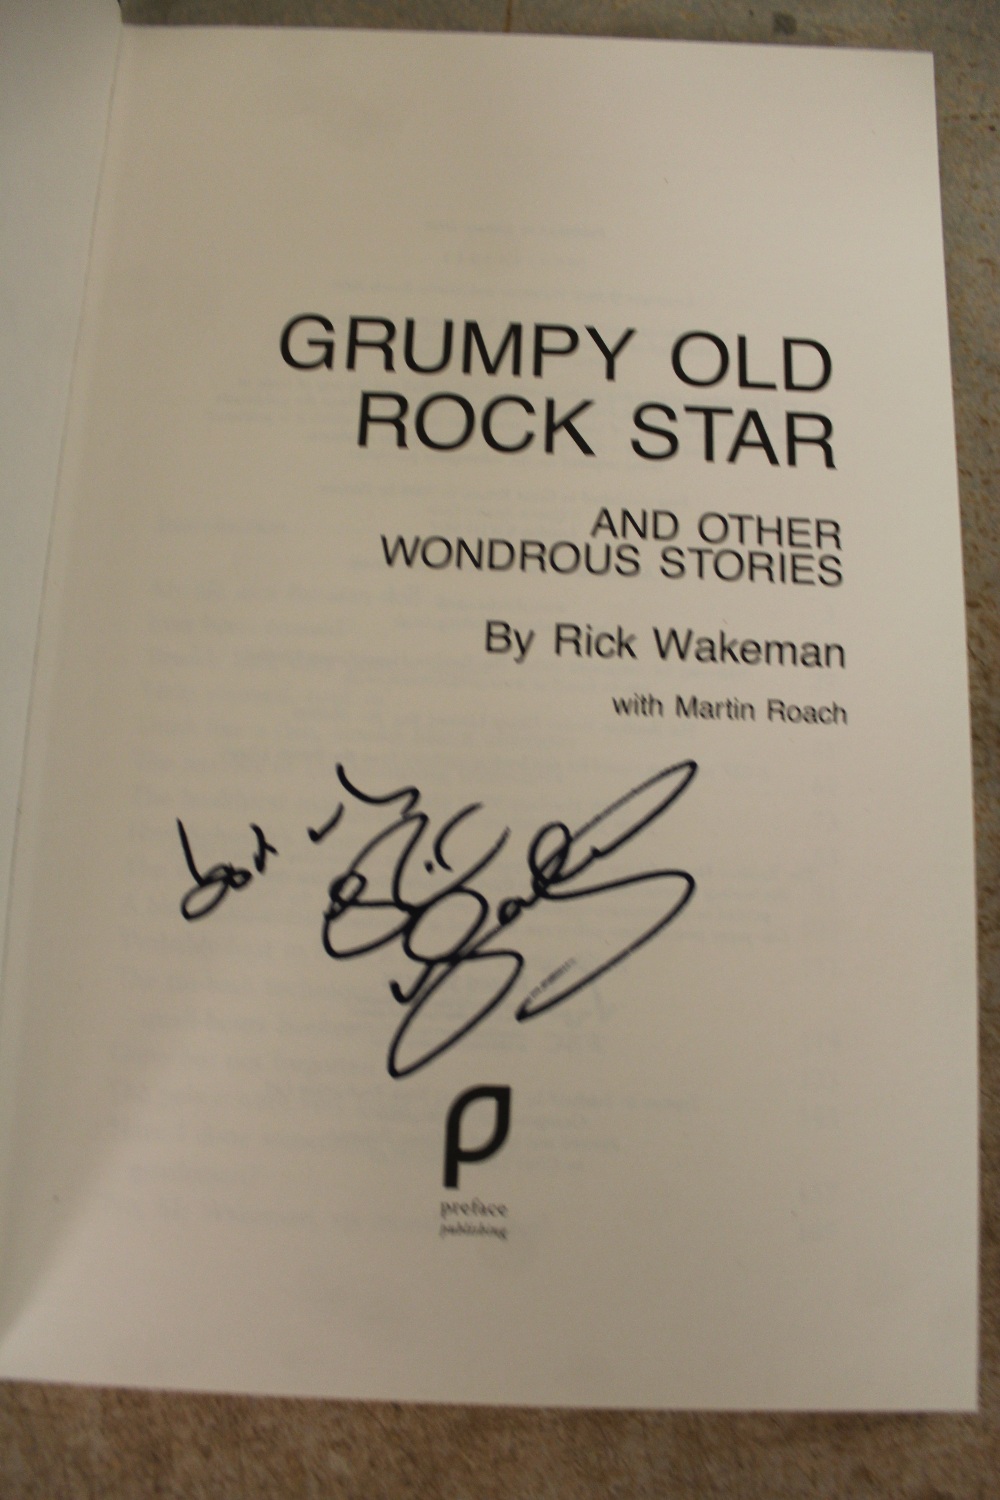 Wakeman [Rick] - Grumpy Old Rock Star, signed first edition 2008, hardback with dustwrapper - Image 2 of 2